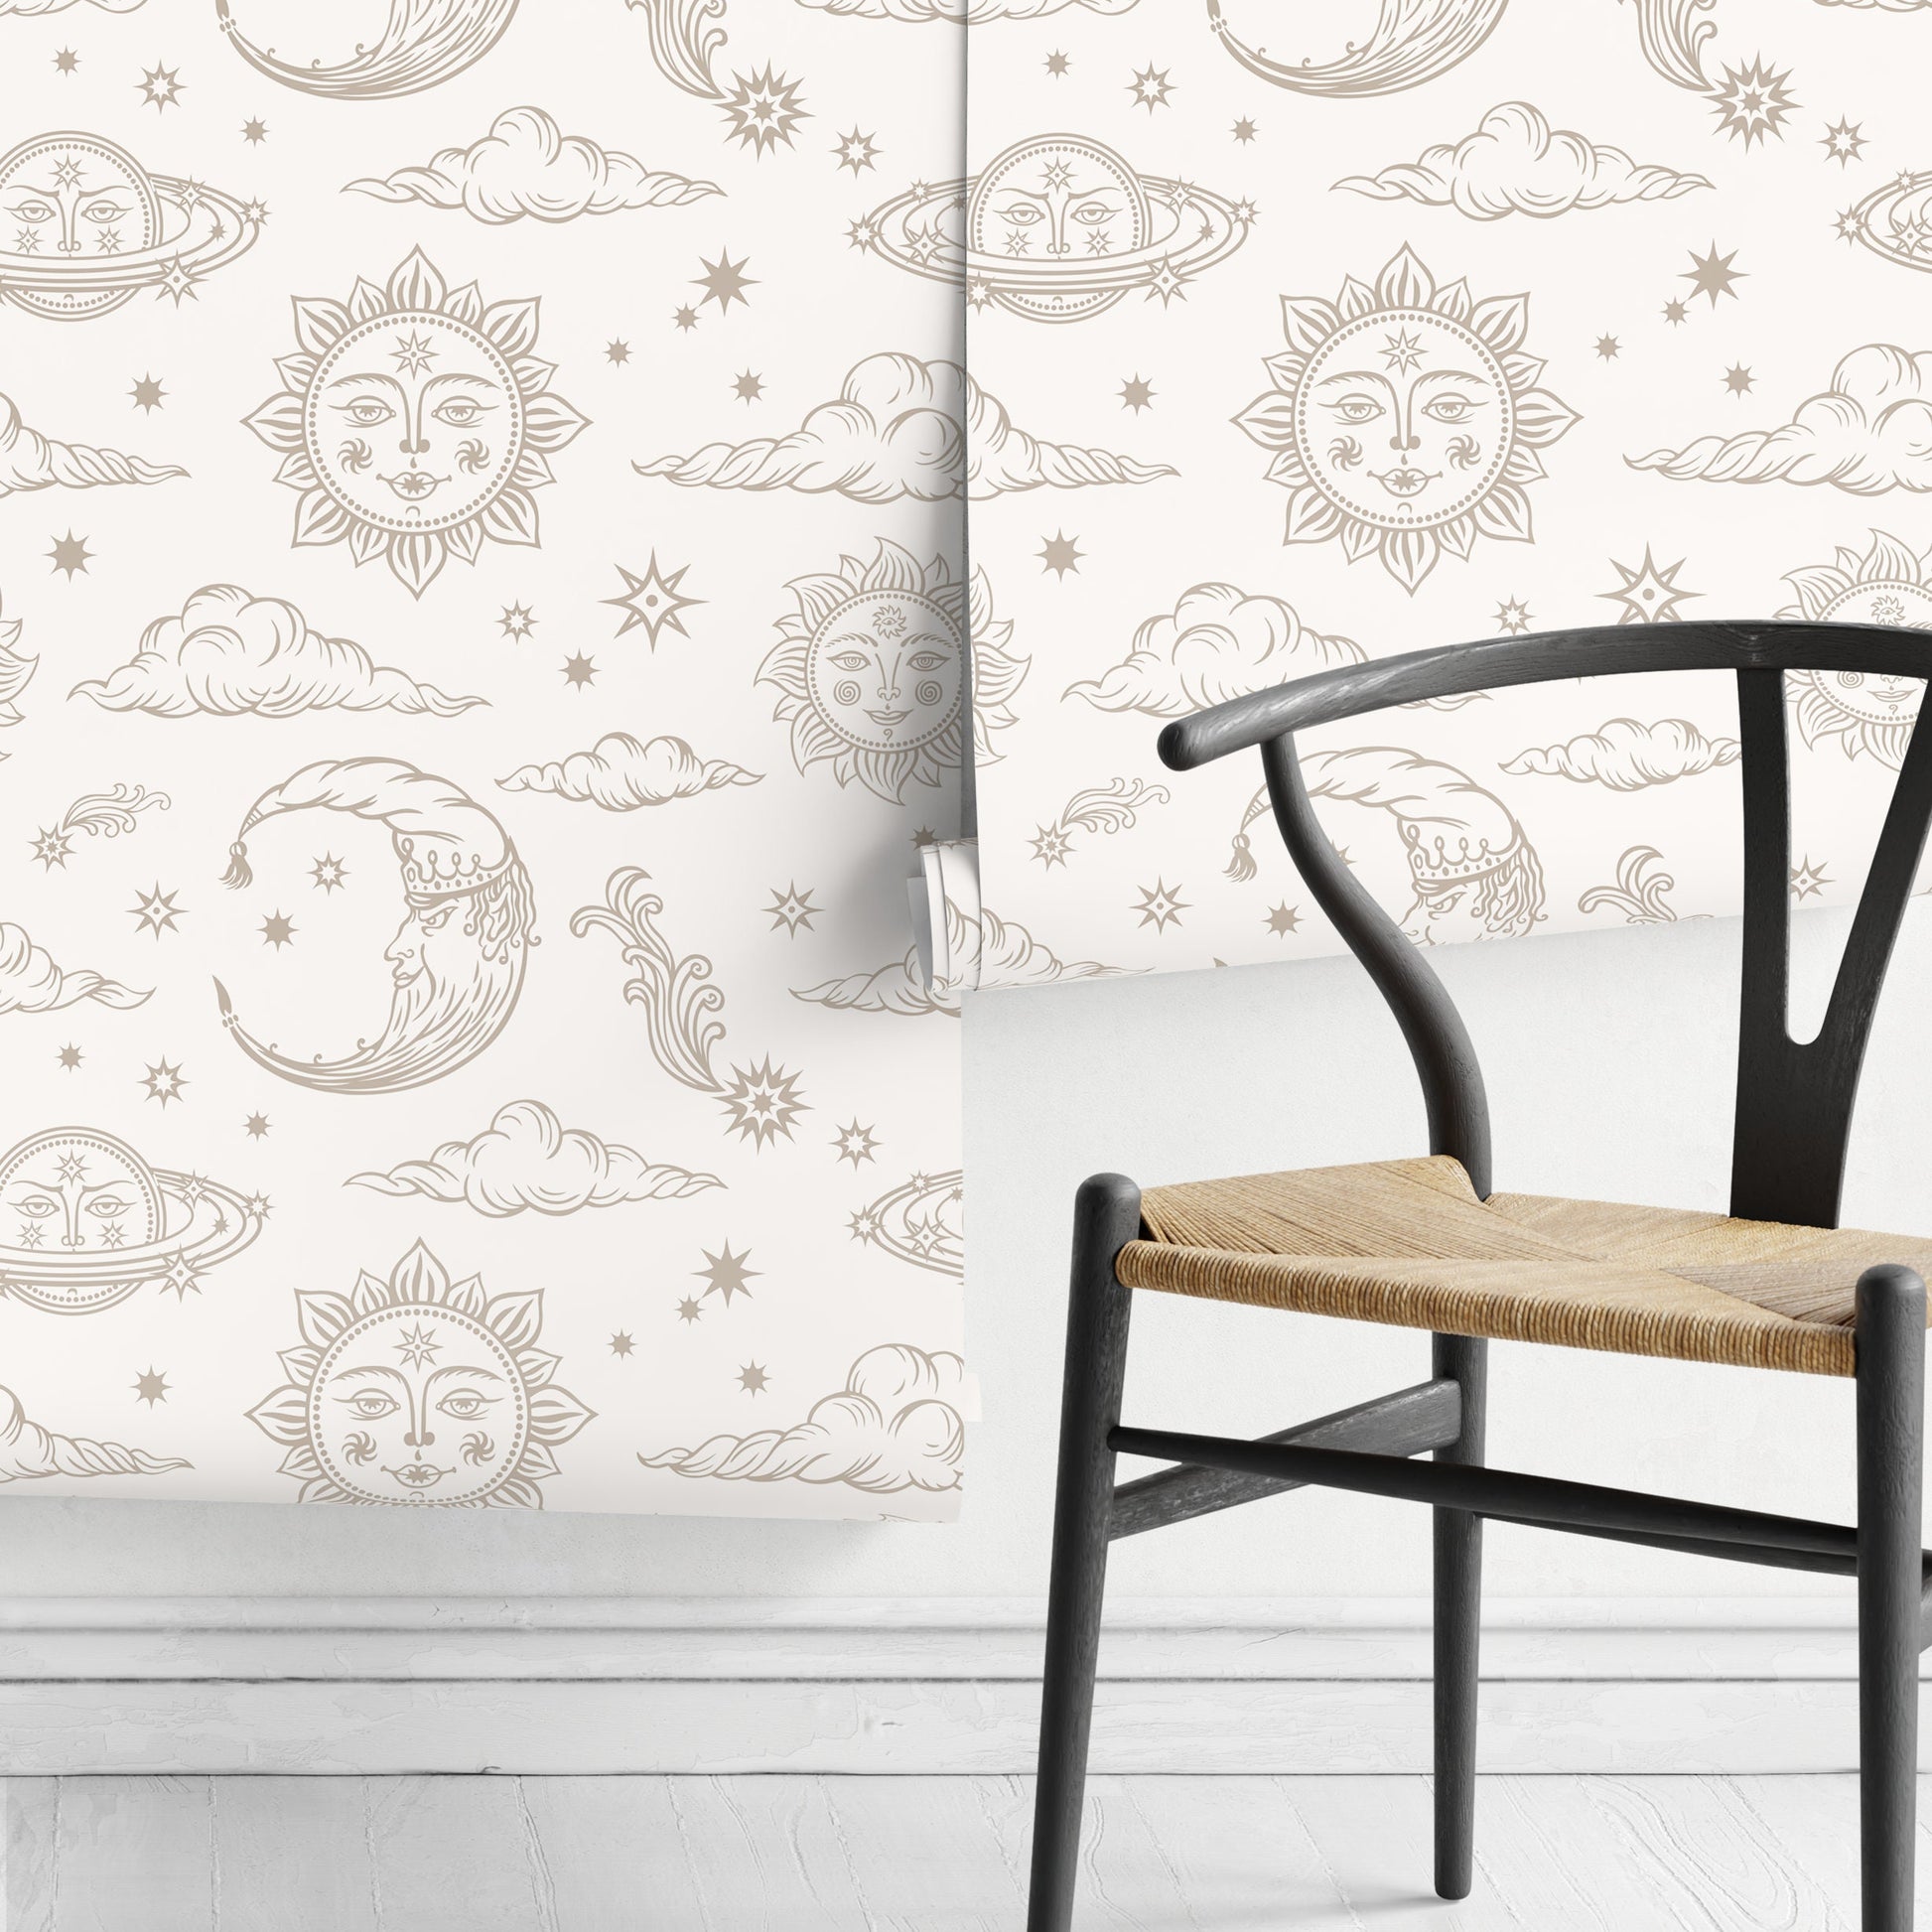 Mystique and Celestial Wallpaper Removable Peel and Stick Wallpaper, Peel and Stick Wallpaper Neutral Moon and Sun - ZABD